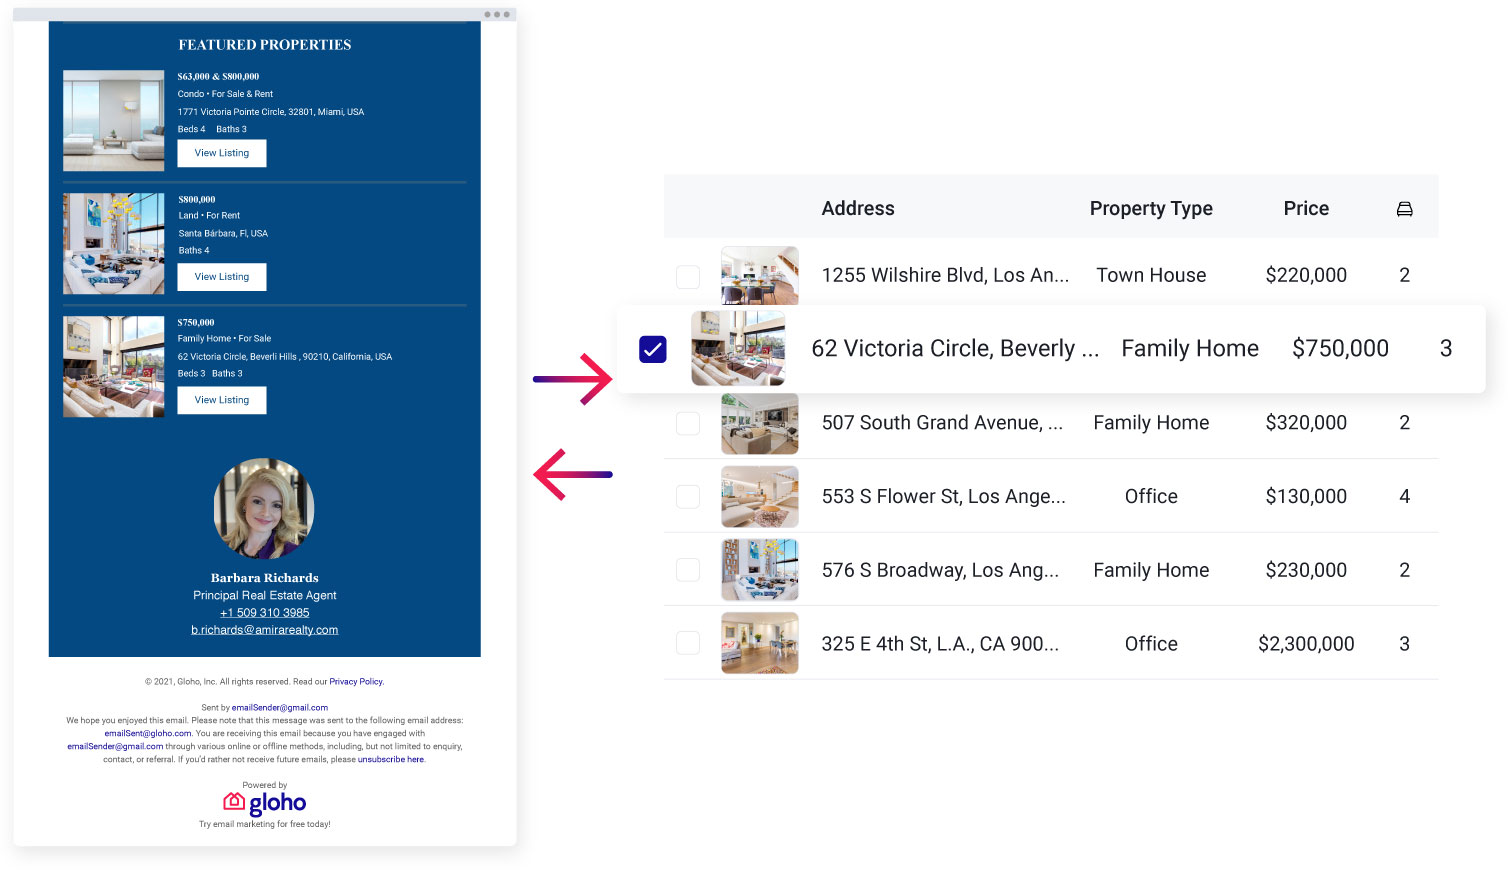 Instantly Synced Property Information